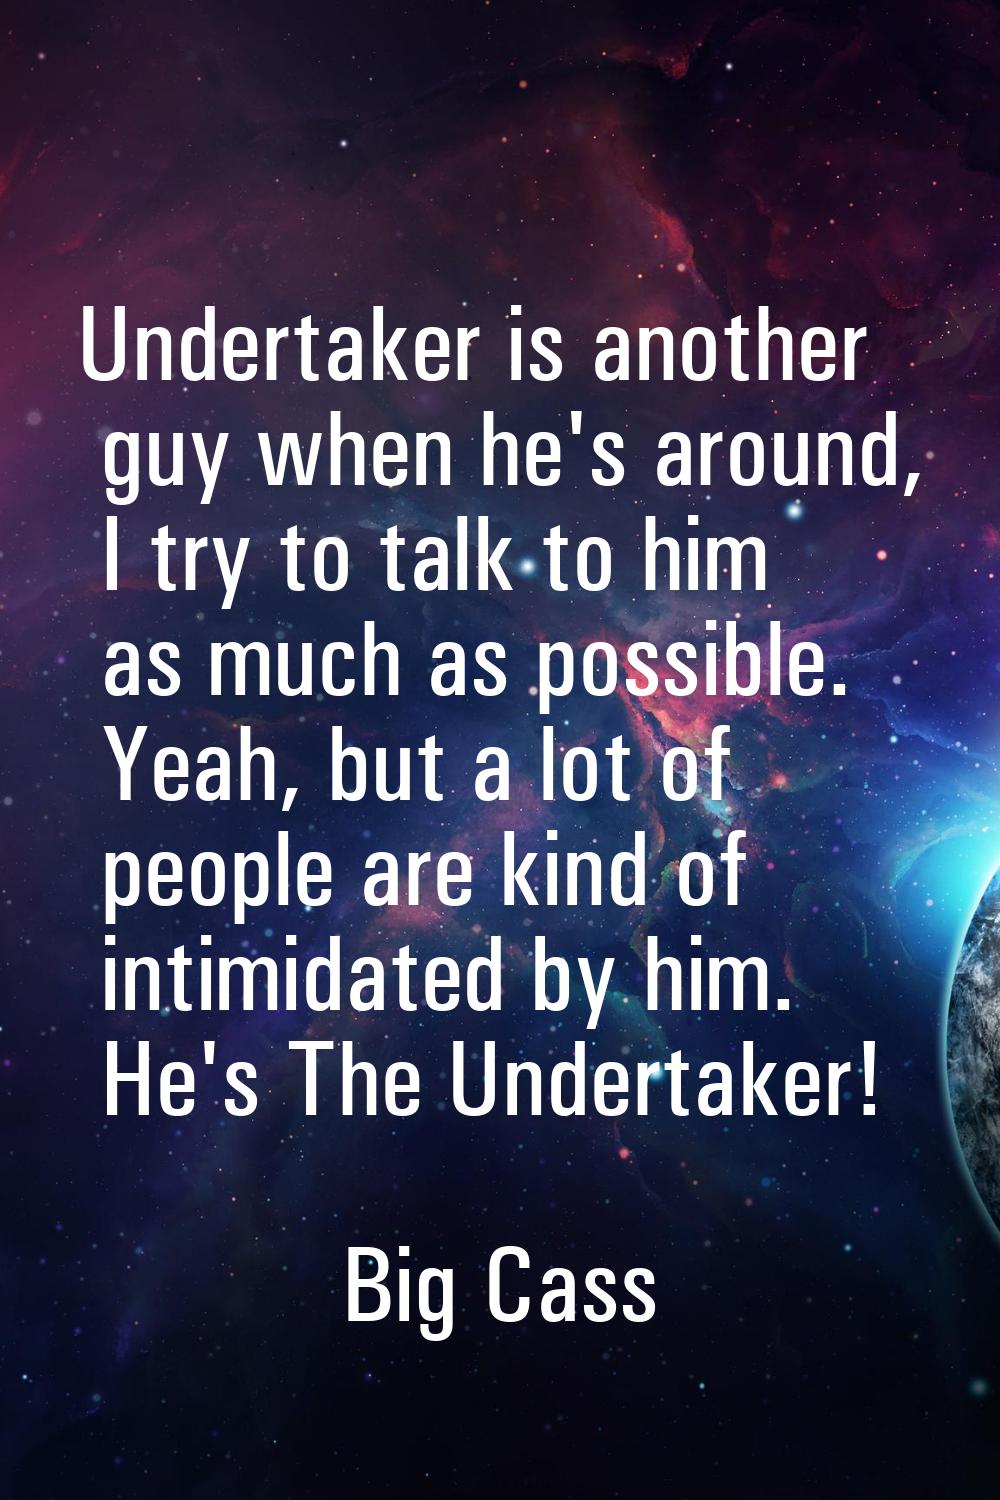 Undertaker is another guy when he's around, I try to talk to him as much as possible. Yeah, but a l